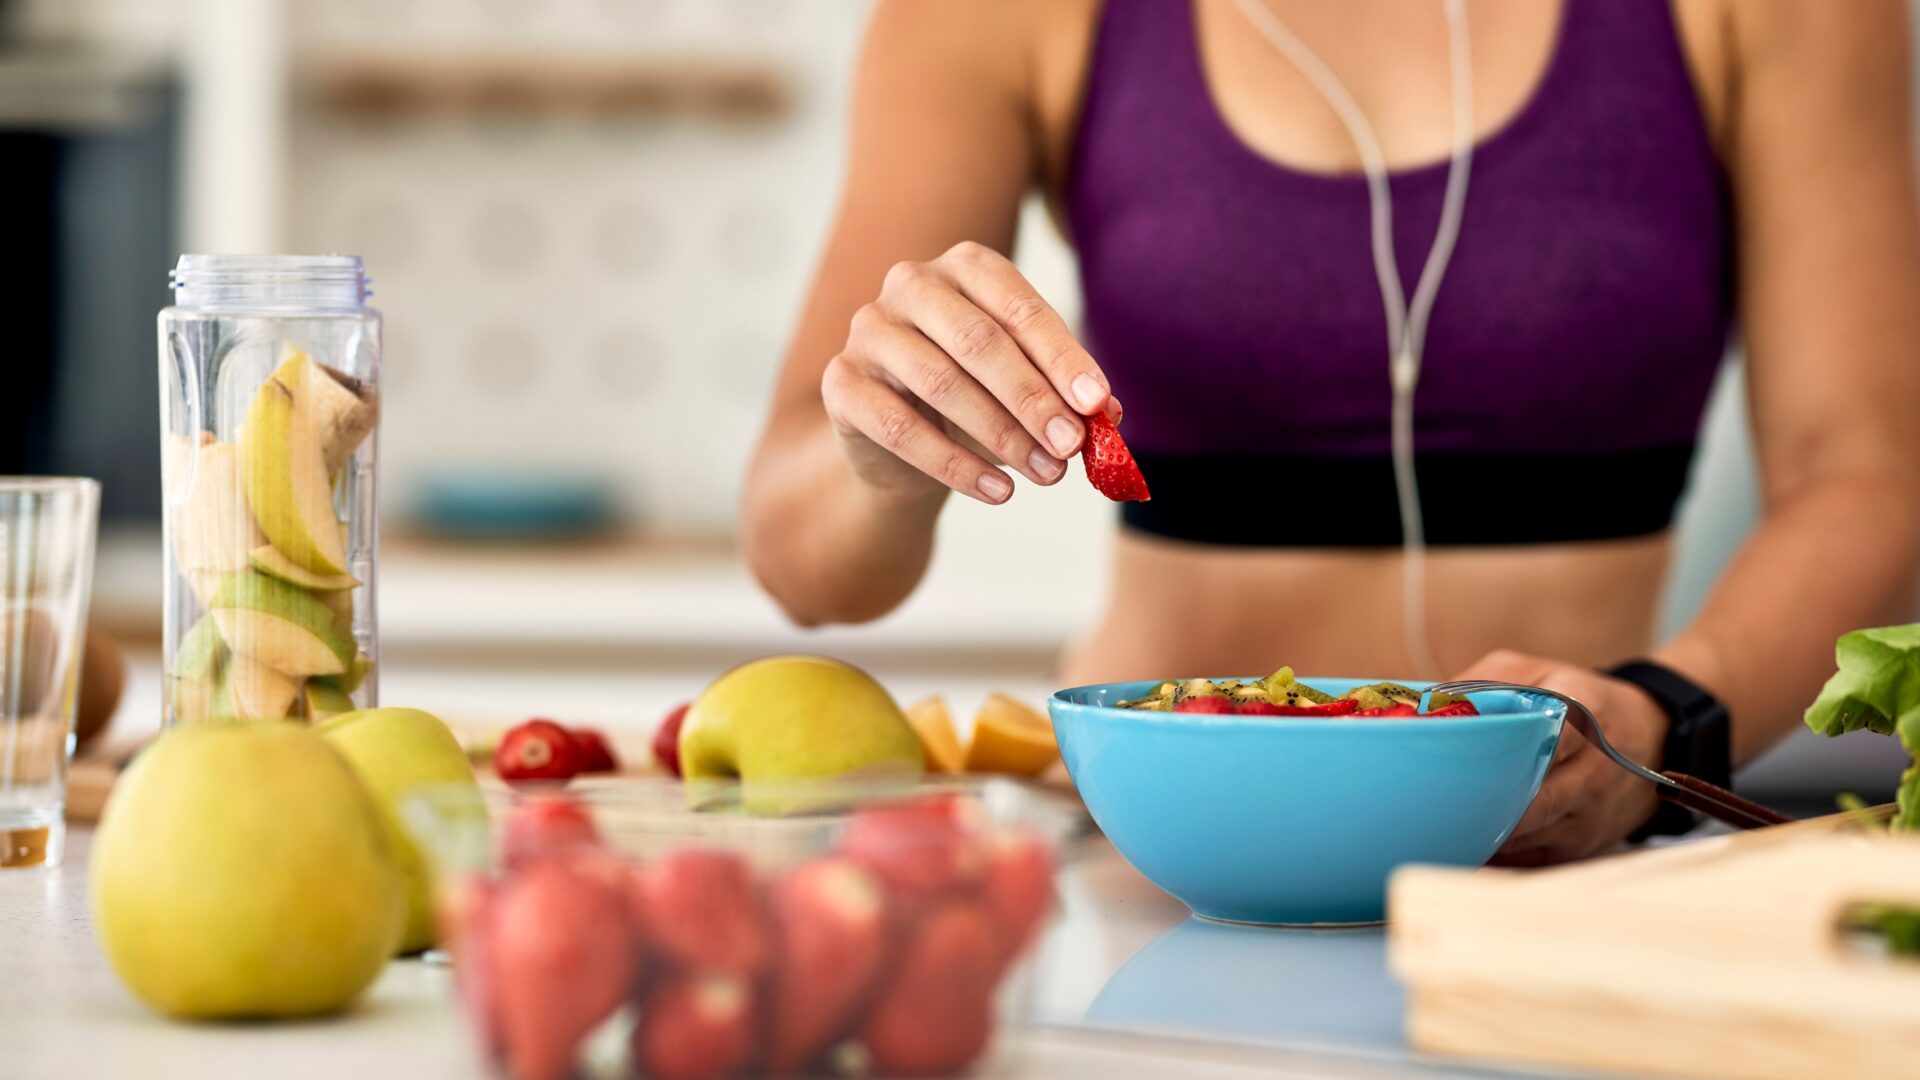 An athletic woman prepares a bowl of fruit.